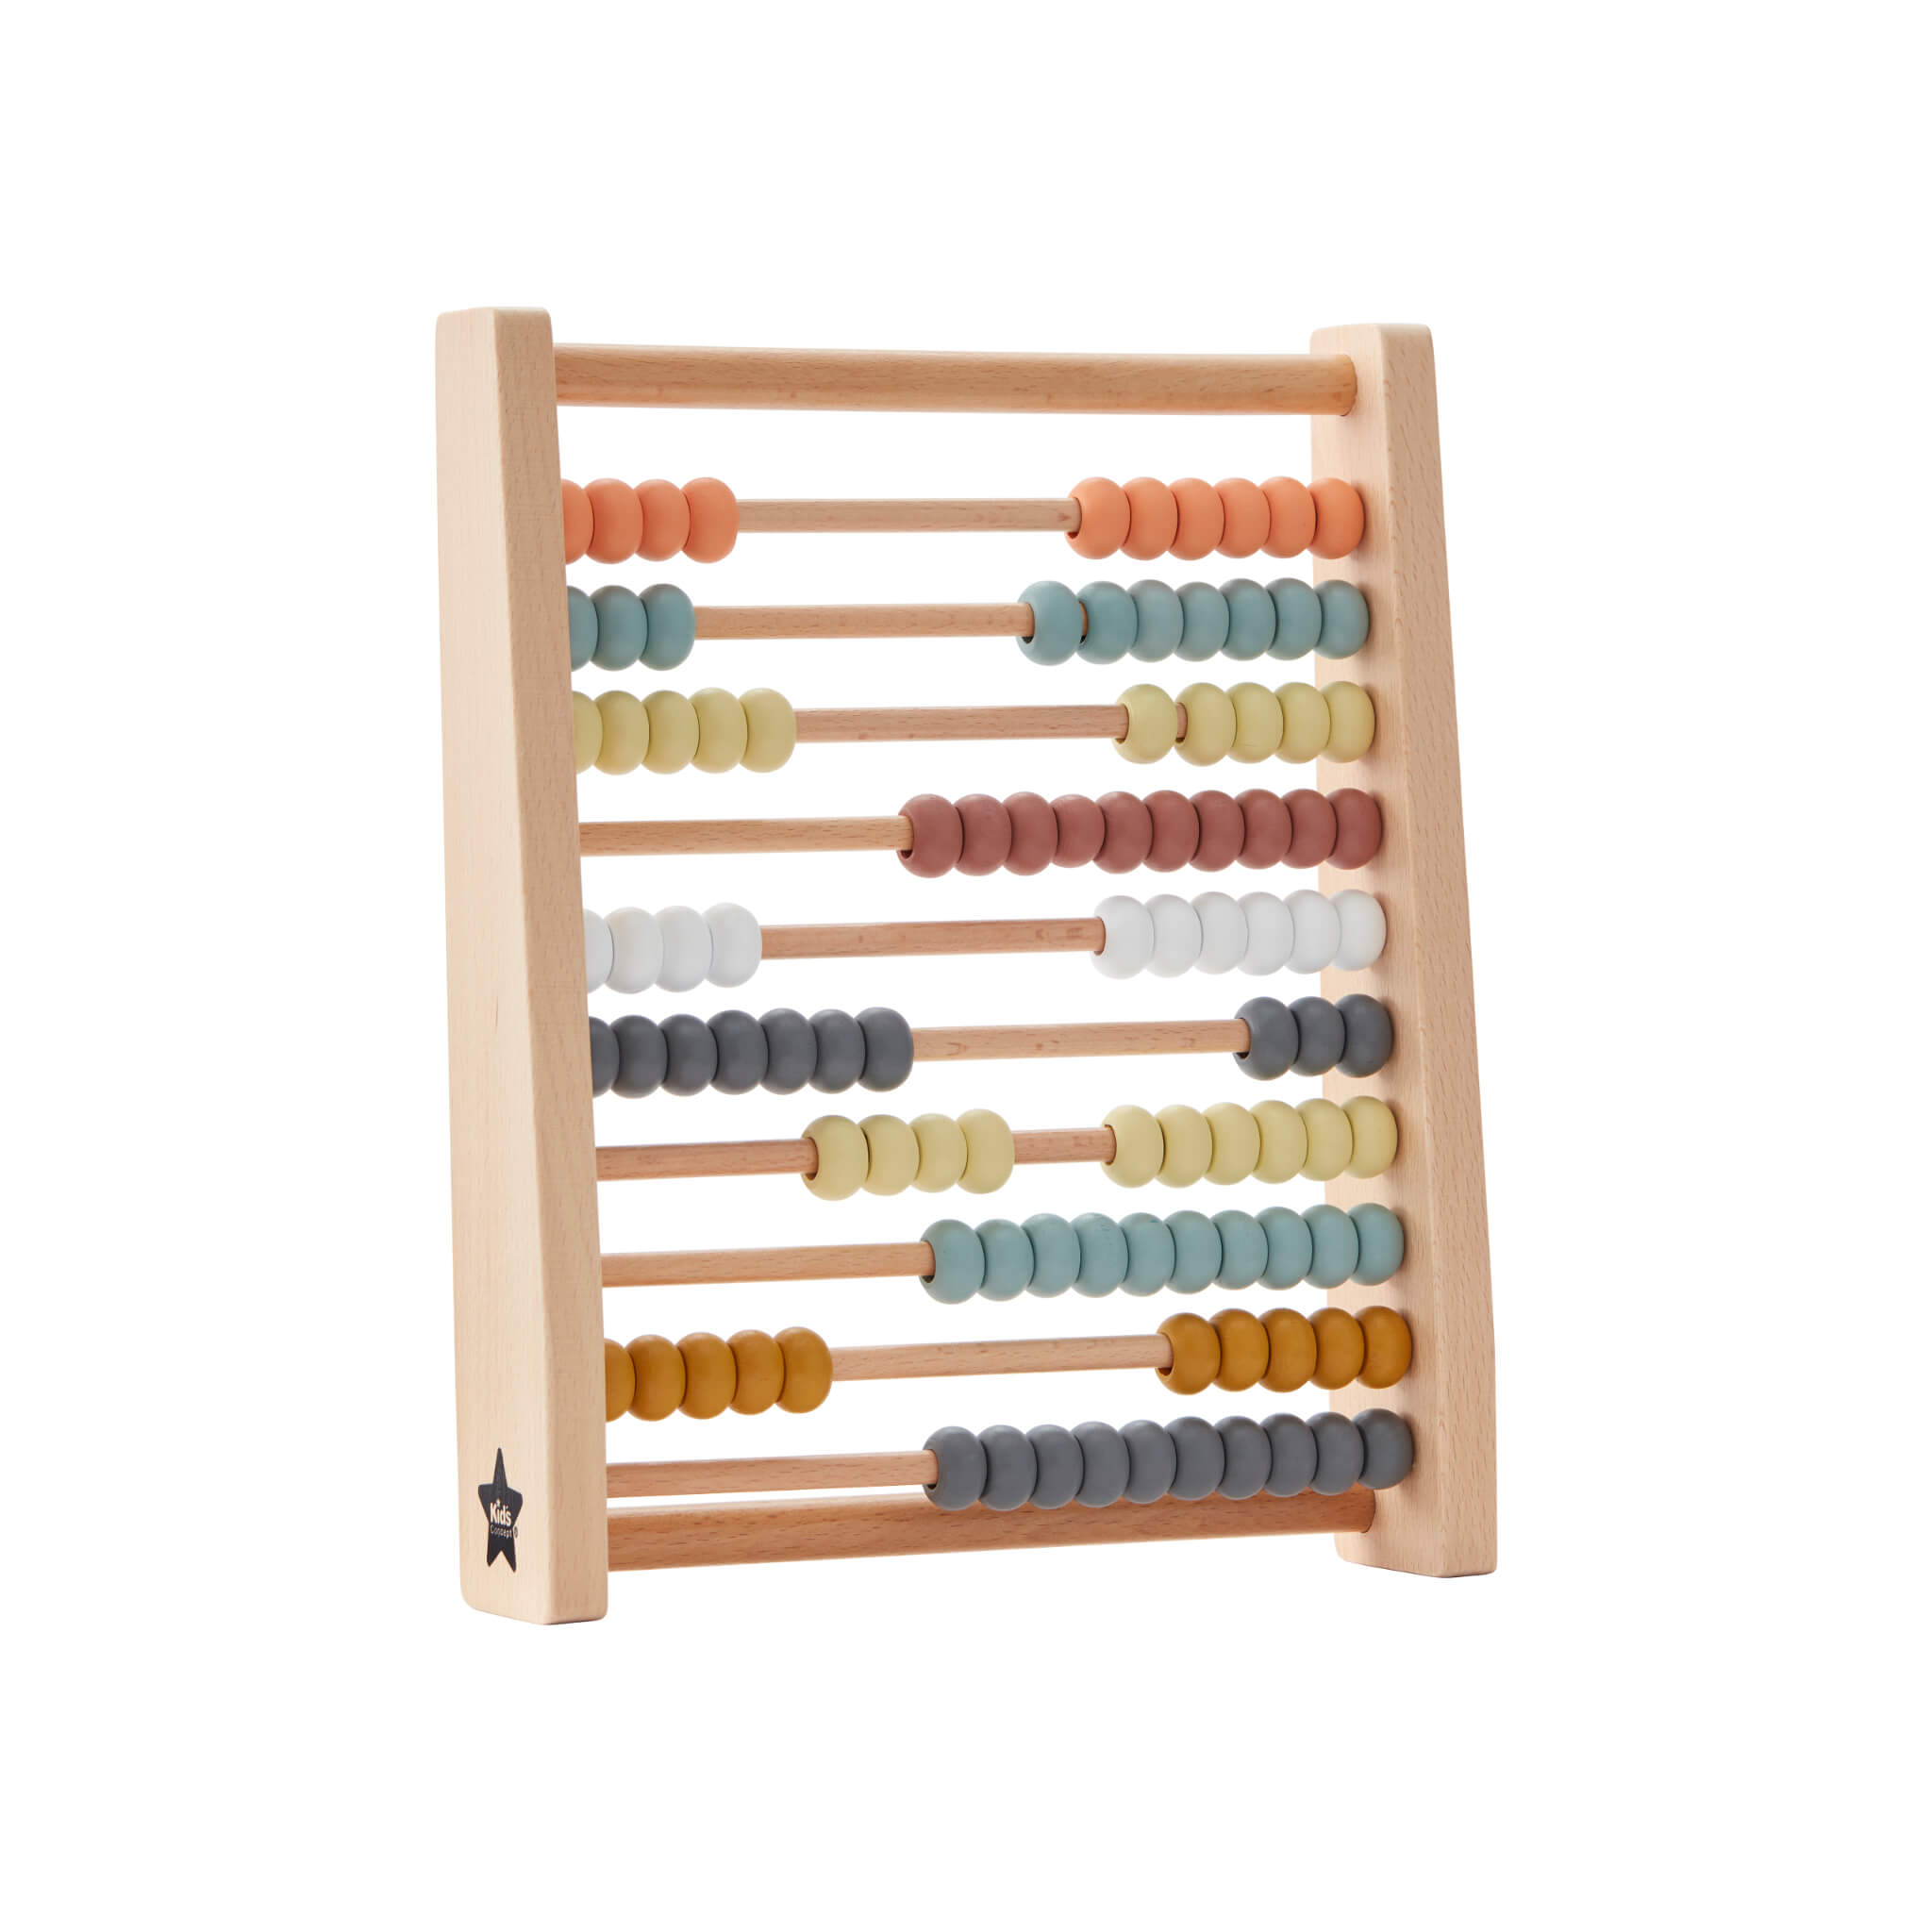 Kids Concept Wooden Abacus